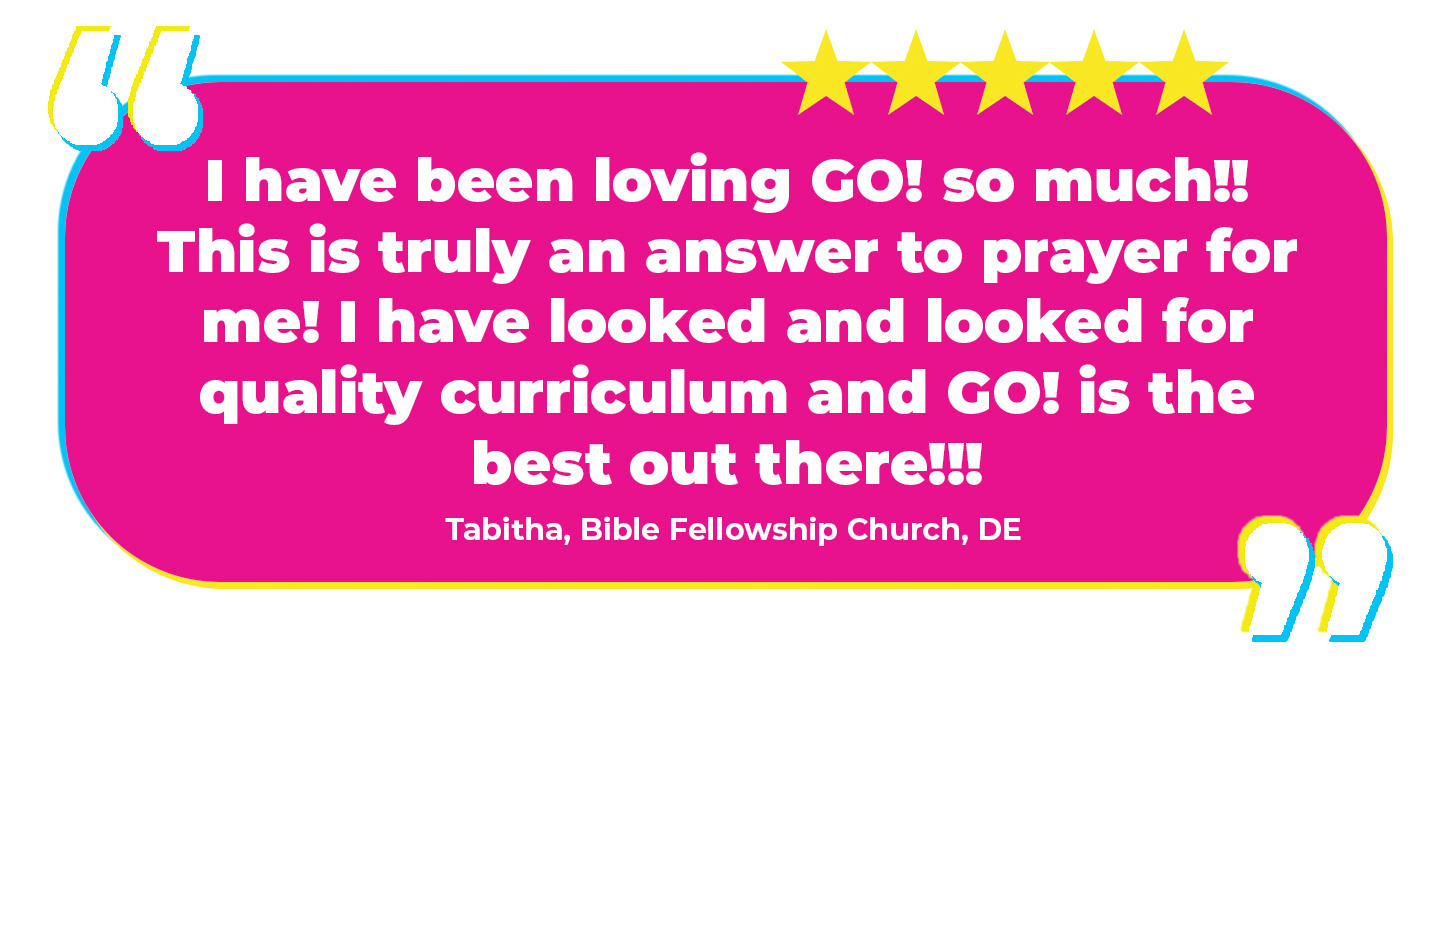 “I have been loving GO! so much!! This is truly an answer to prayer for me! I have looked and looked for quality curriculum and GO! is the best out there!!! Tabitha, Bible Fellowship Church, DE Why we love it: We think so too! But it's nice to hear other people say it. Thanks, Mom! (Haha...jk! Not our mom!)